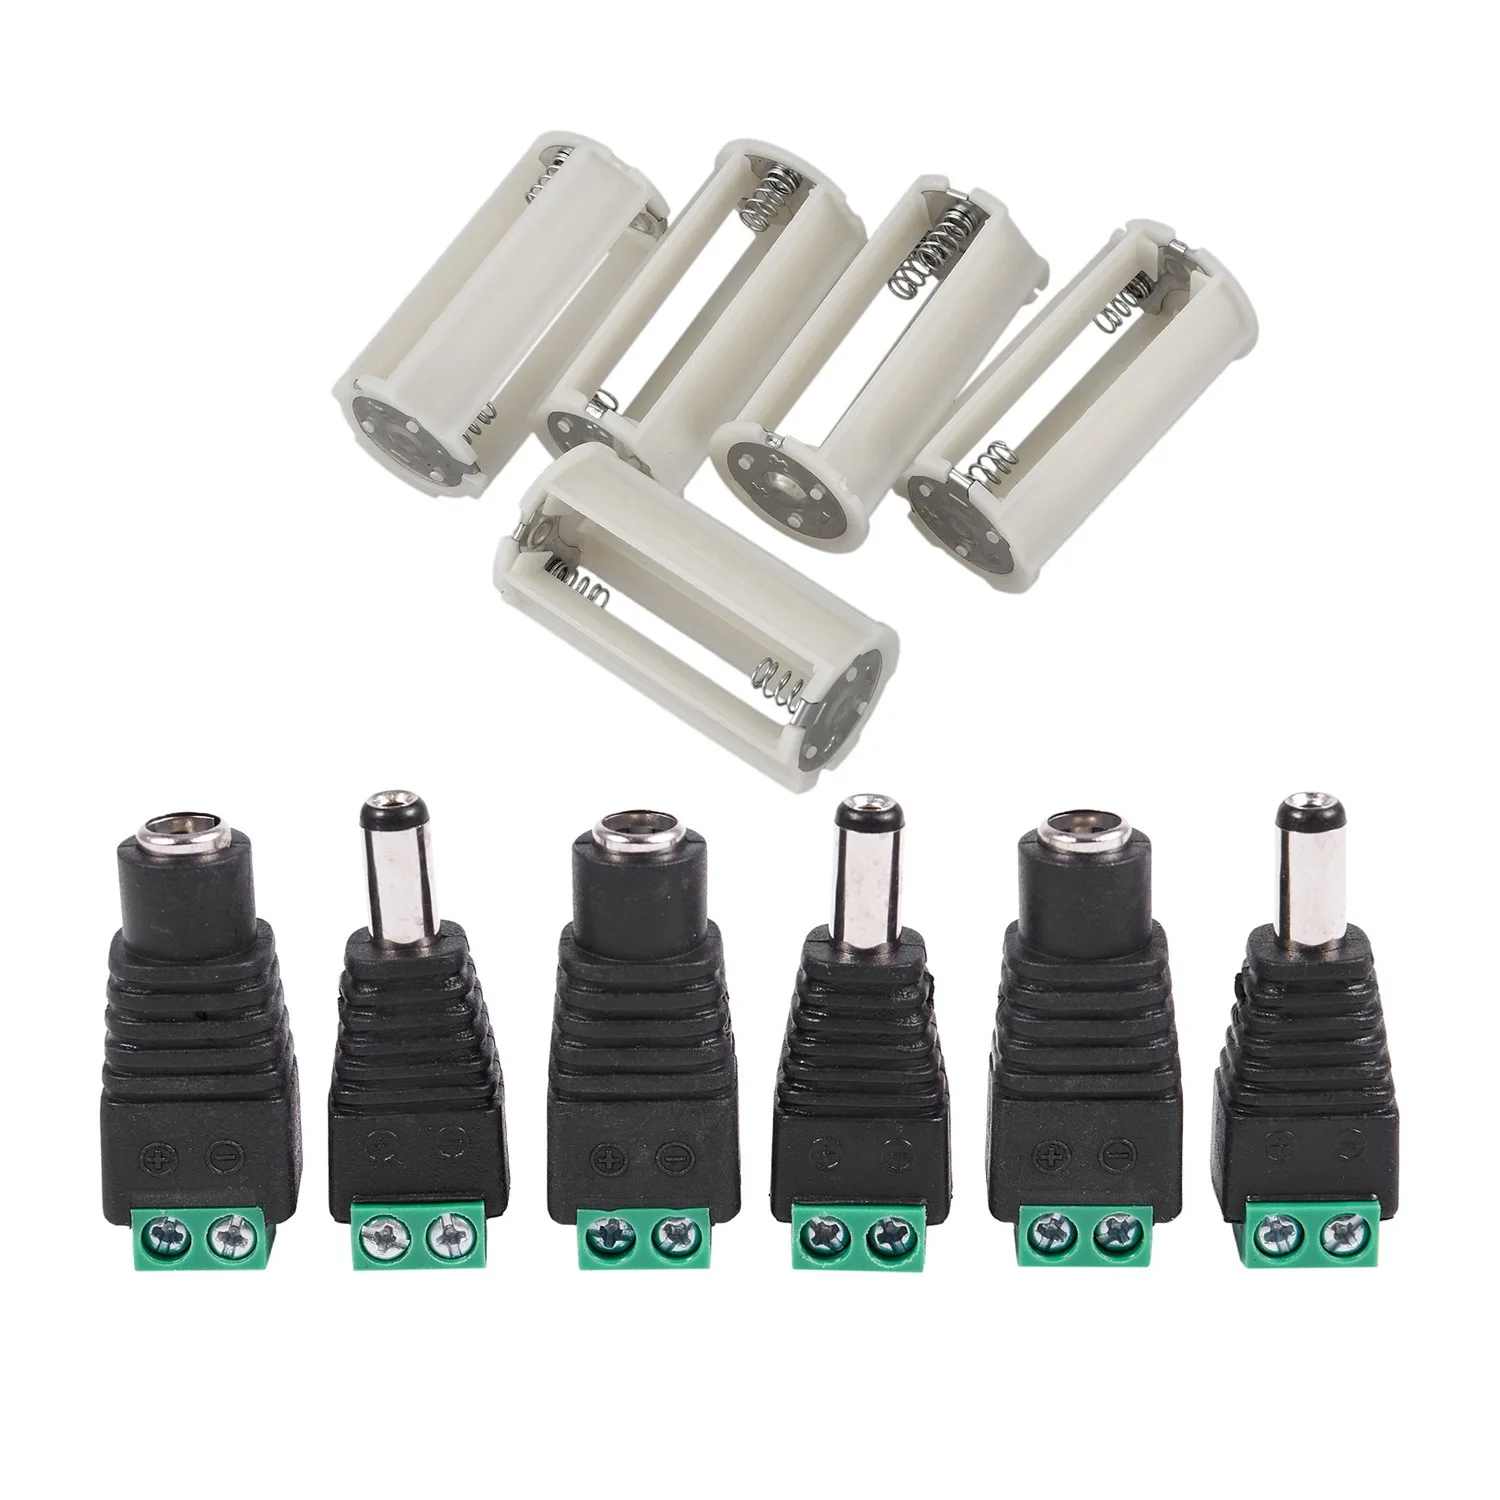 

New 5X Serial Connection 3X 1.5V AA Battery Plastic Holder & 6 Pcs 5.5X2.1Mm Female + Male CCTV DC Power Connector Adapter